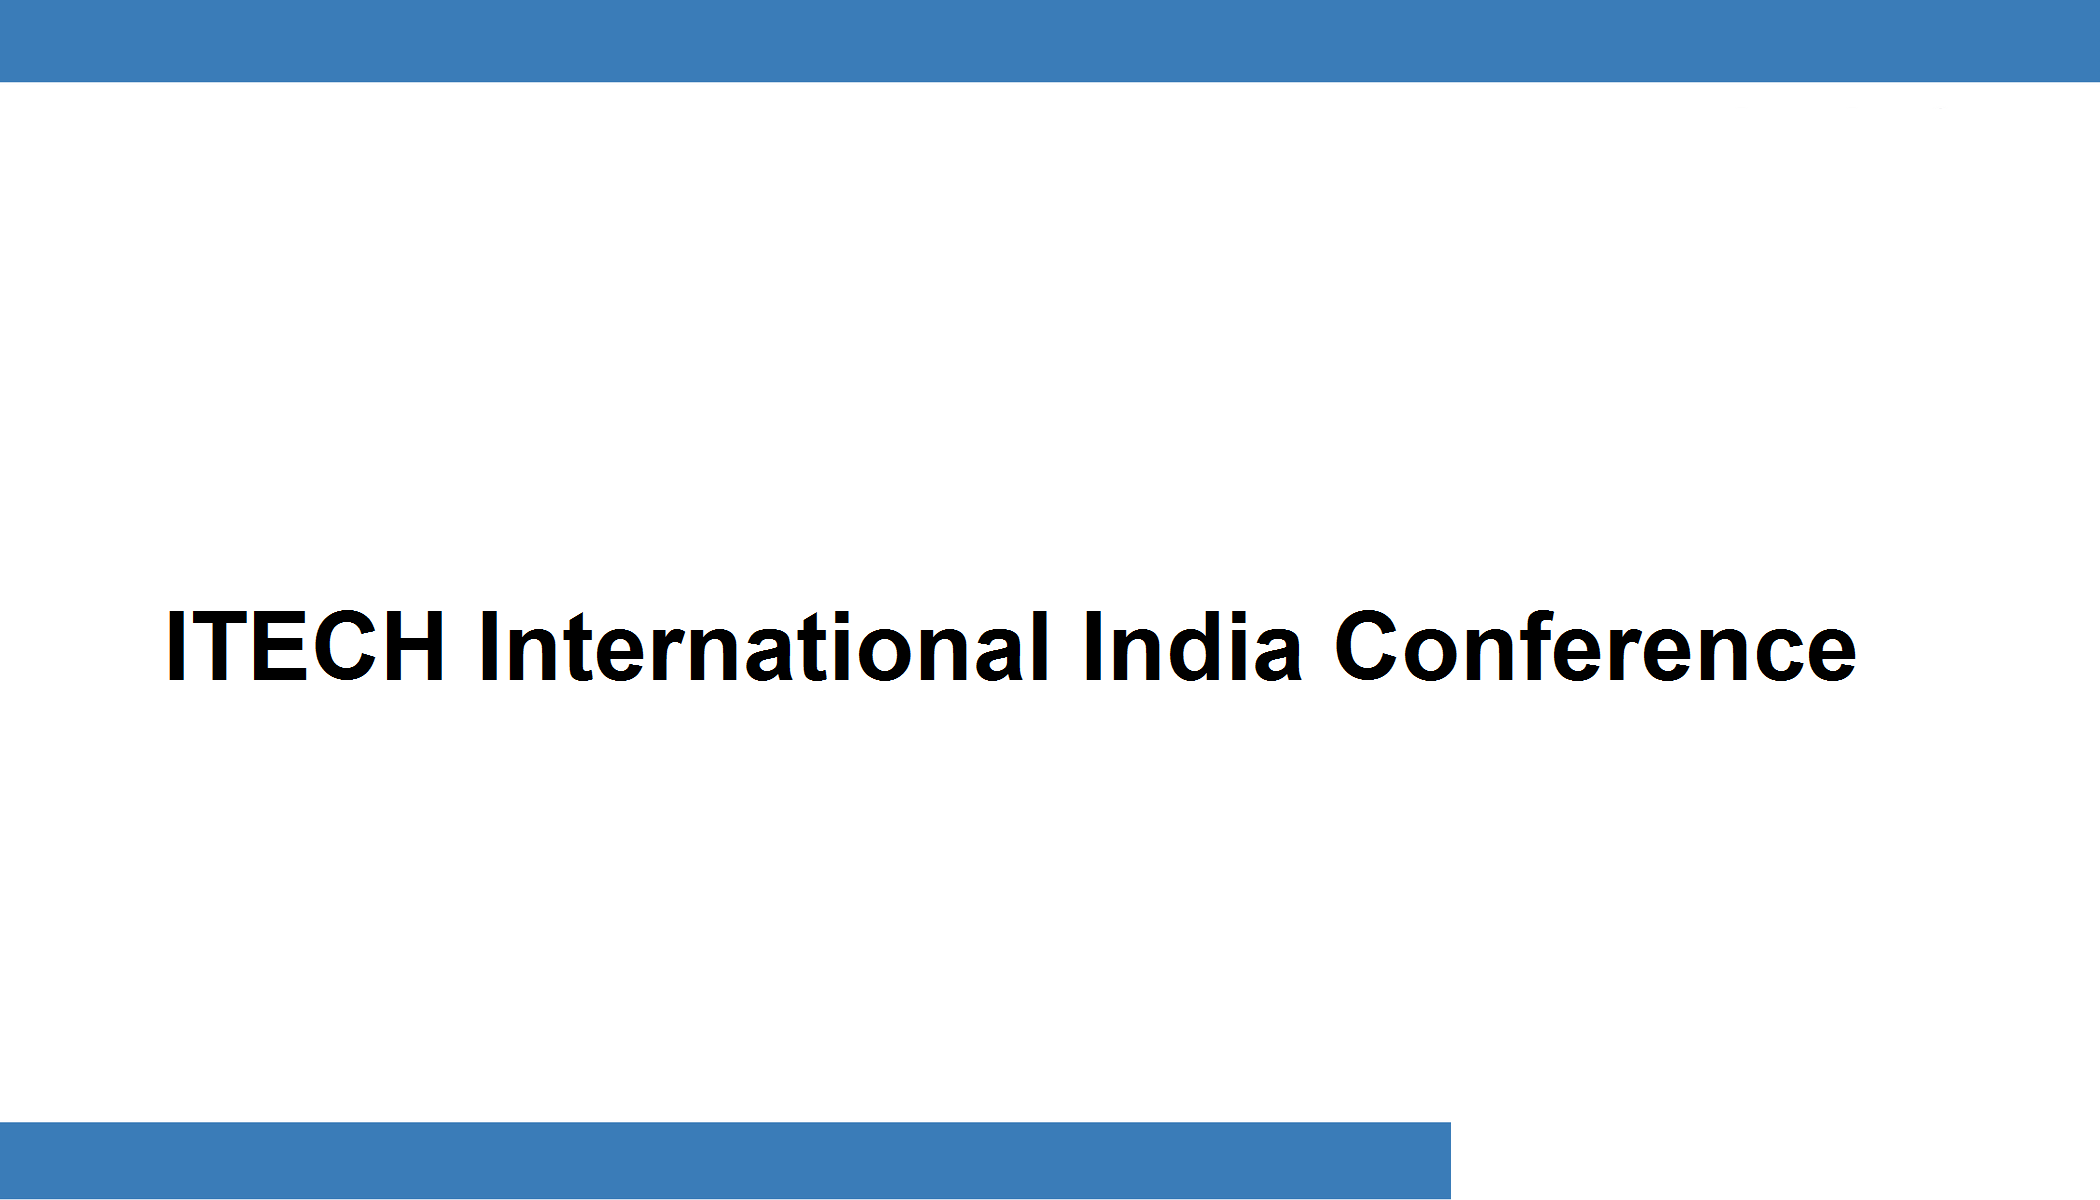 ITECH International India Conference